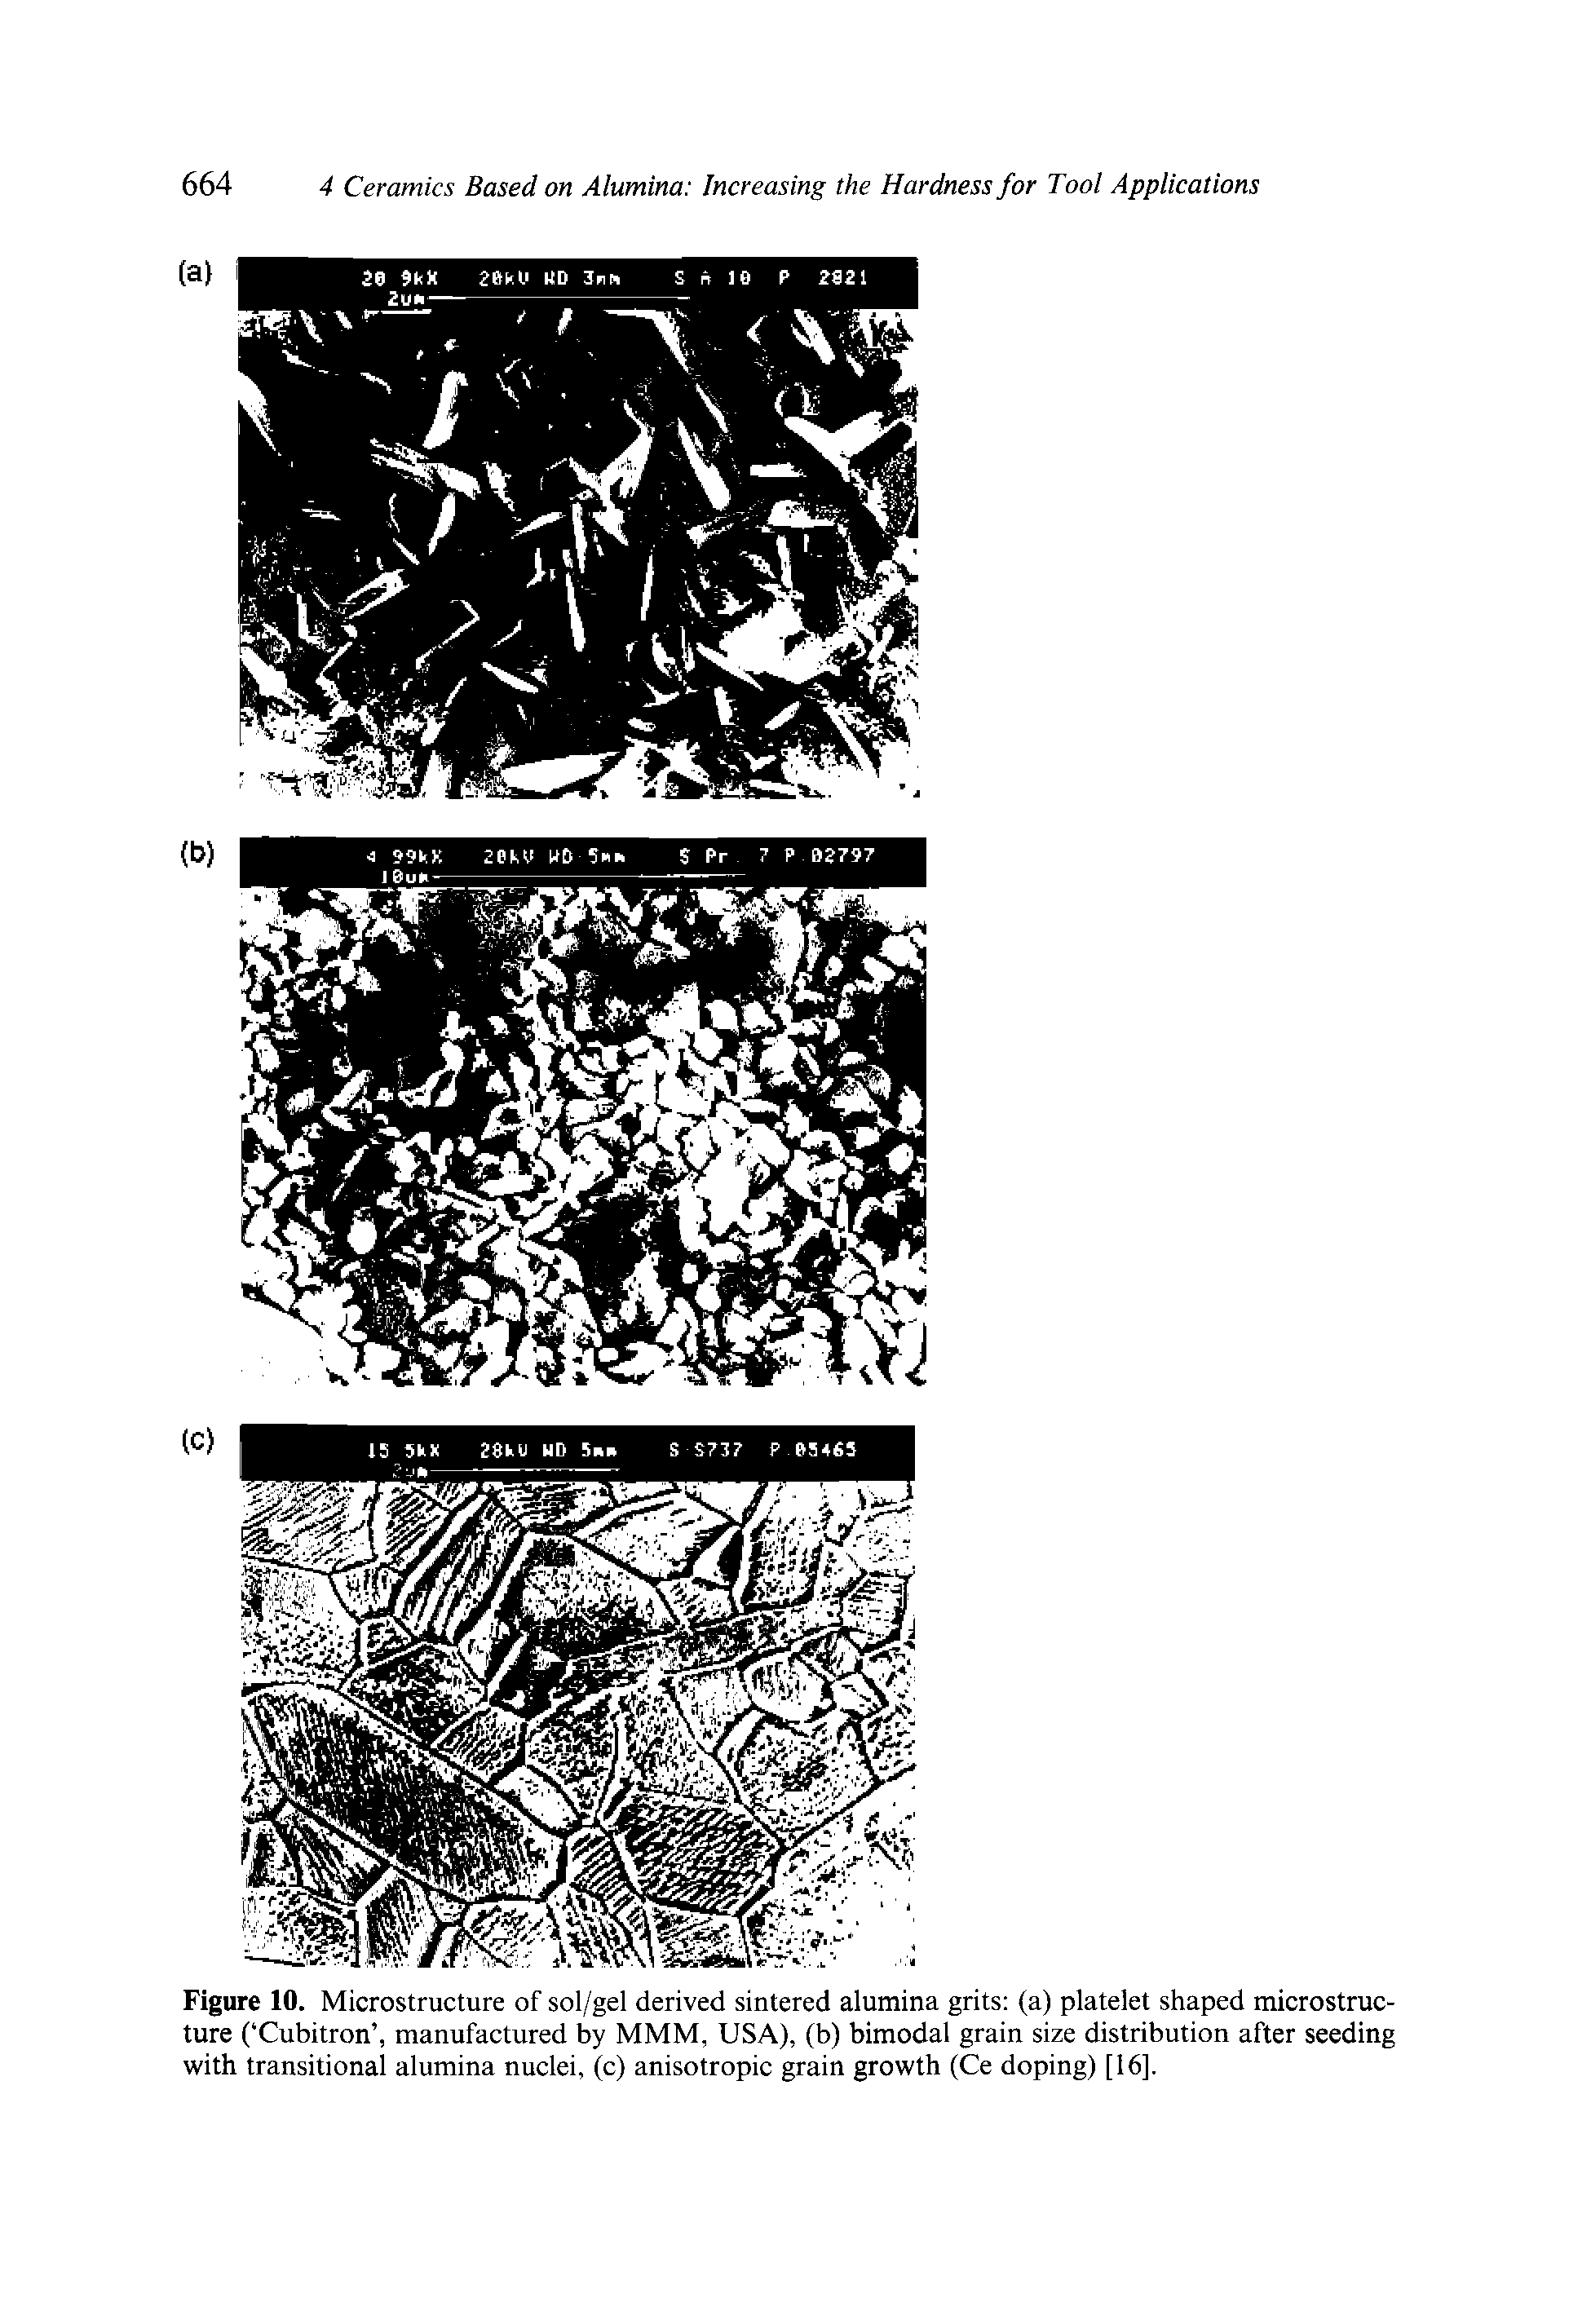 Figure 10. Microstructure of sol/gel derived sintered alumina grits (a) platelet shaped microstructure ( Cubitron , manufactured by MMM, USA), (b) bimodal grain size distribution after seeding with transitional alumina nuclei, (c) anisotropic grain growth (Ce doping) [16].